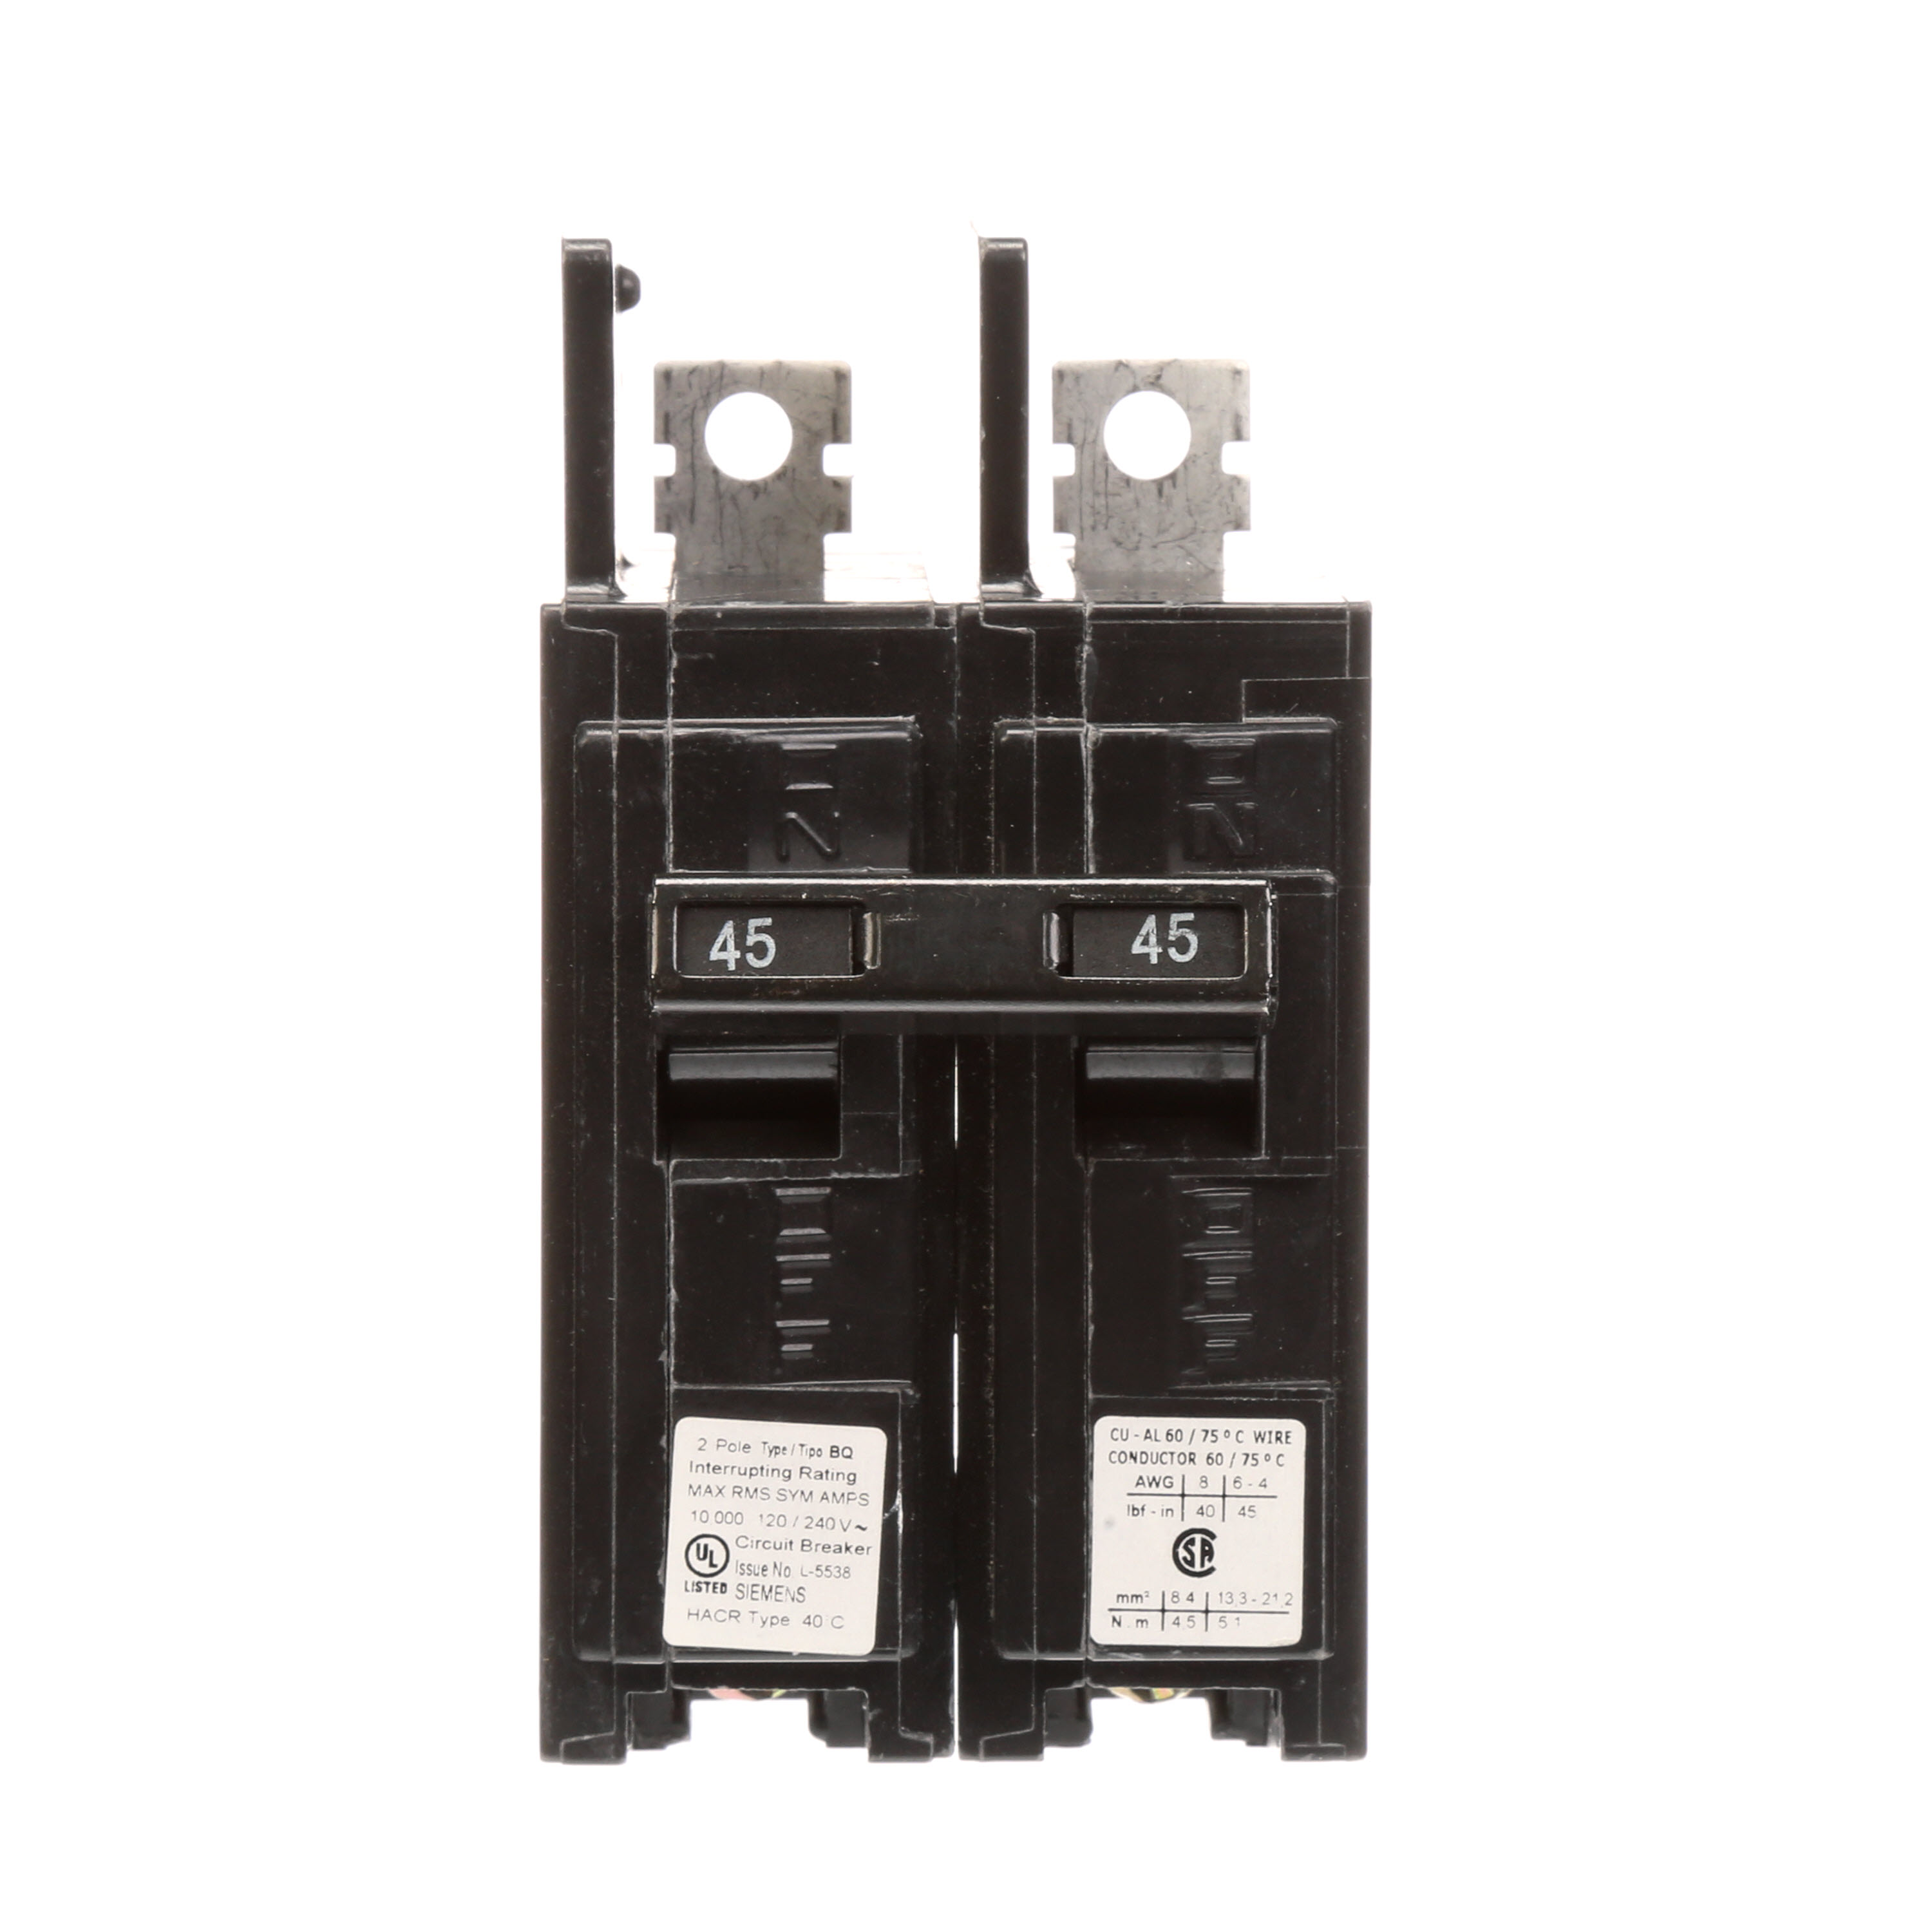 Siemens Low Voltage Molded Case Circuit Breakers General Purpose MCCBs - Type BQ, 2-Pole, 120/240VAC are Circuit Protection Molded Case Circuit Breakers. 2-Pole Common-Trip circuit breaker type BQ. Rated 120/240V (045A) (AIR 10 kA). Special features Load side lugs are included.